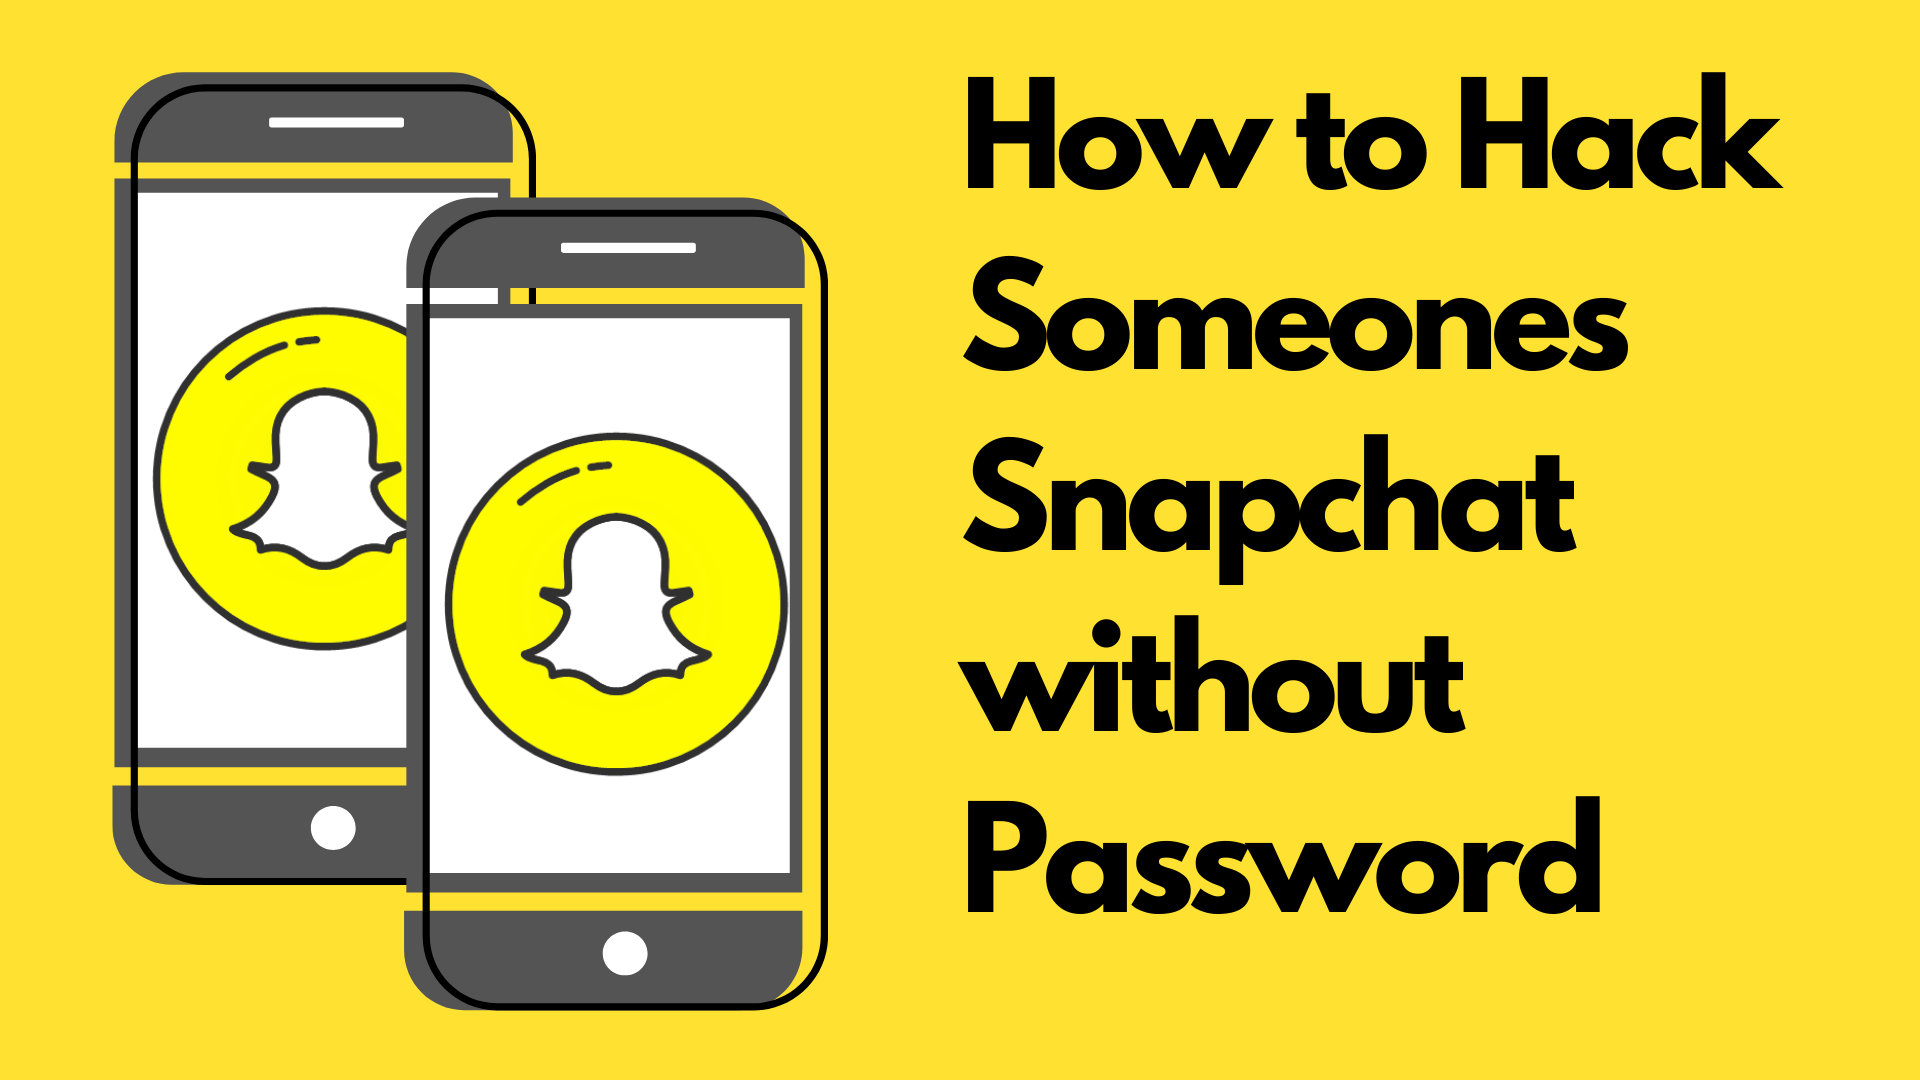 How to Hack Someones Snapchat | Works without Password